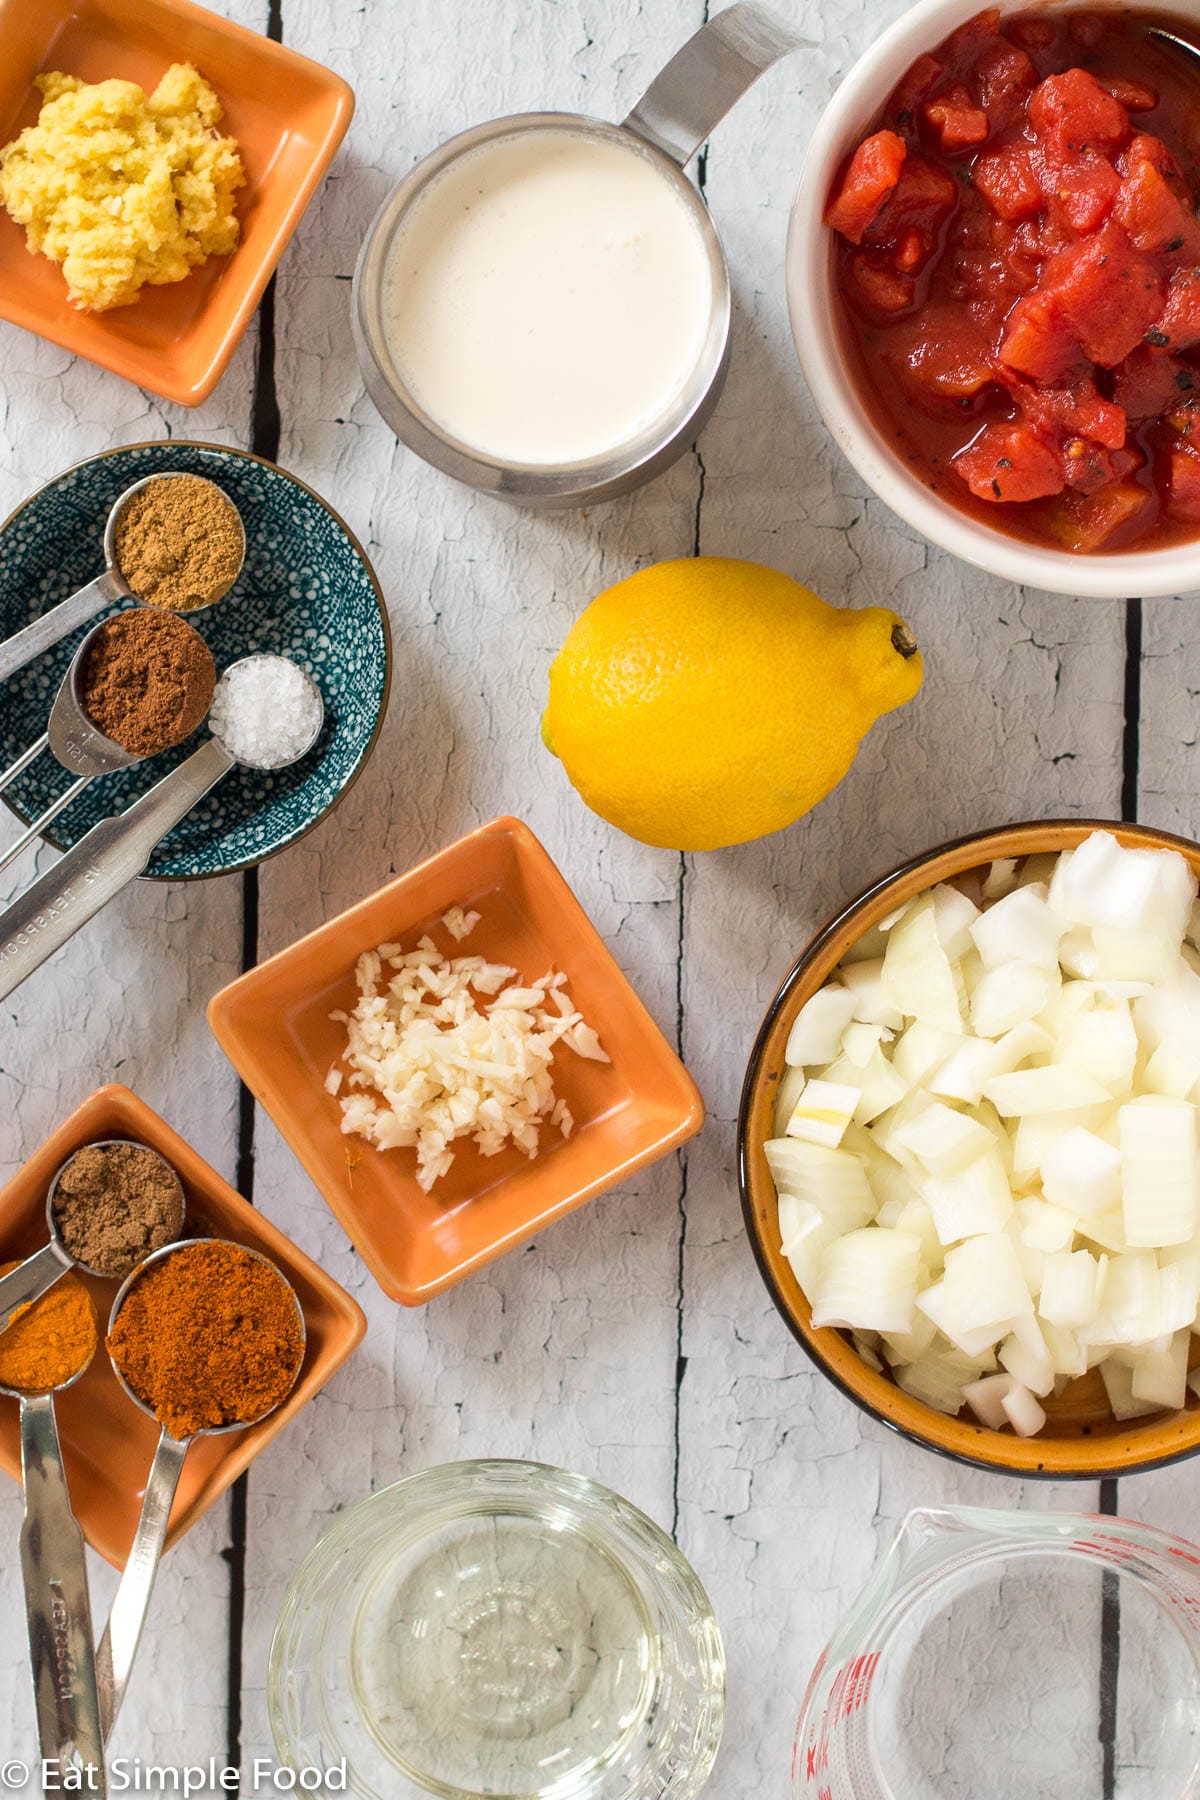 Ingredients in small cups and colorful containers: minced ginger, cream, diced tomatoes, garlic, 1 lemon, diced onions, vegetable oil, water, 6 teaspoons of colorful spices on white table.